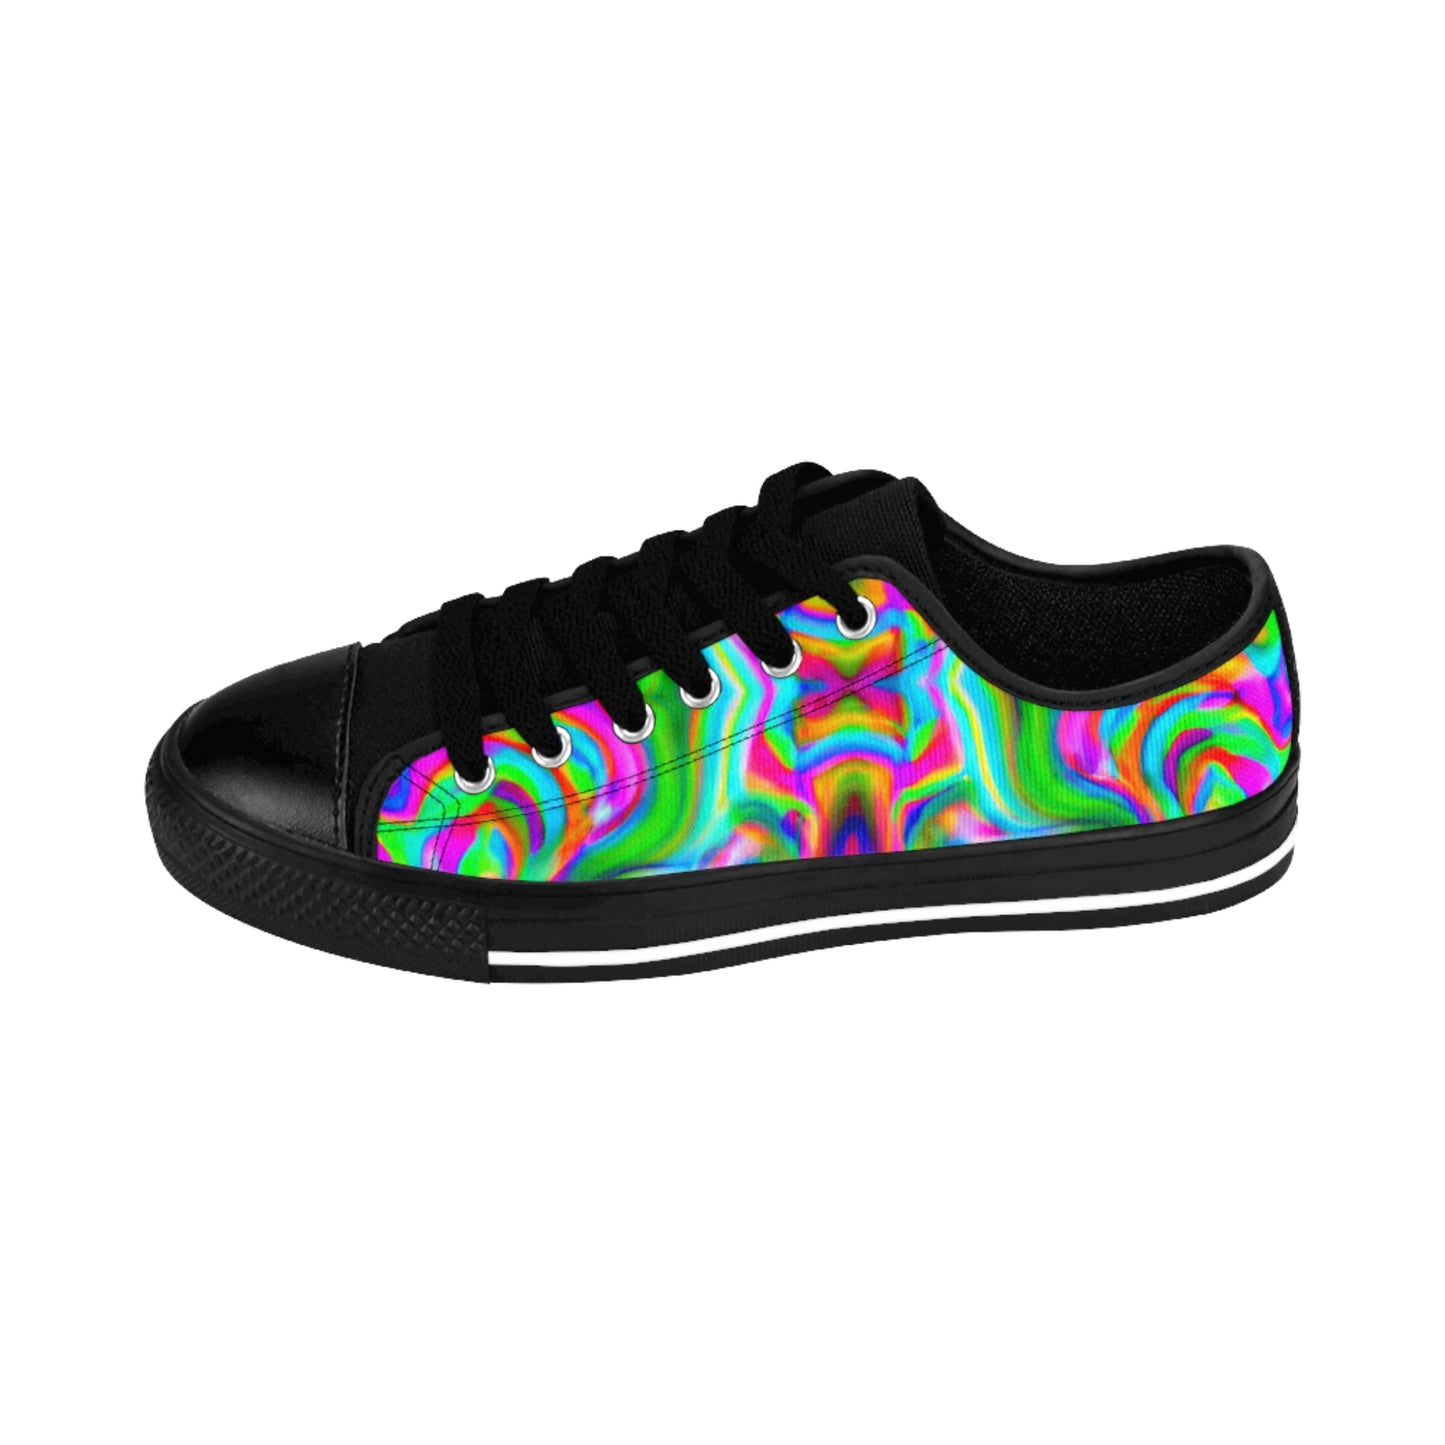 .

Fridolino the Shoe Maker - Psychedelic Low Top